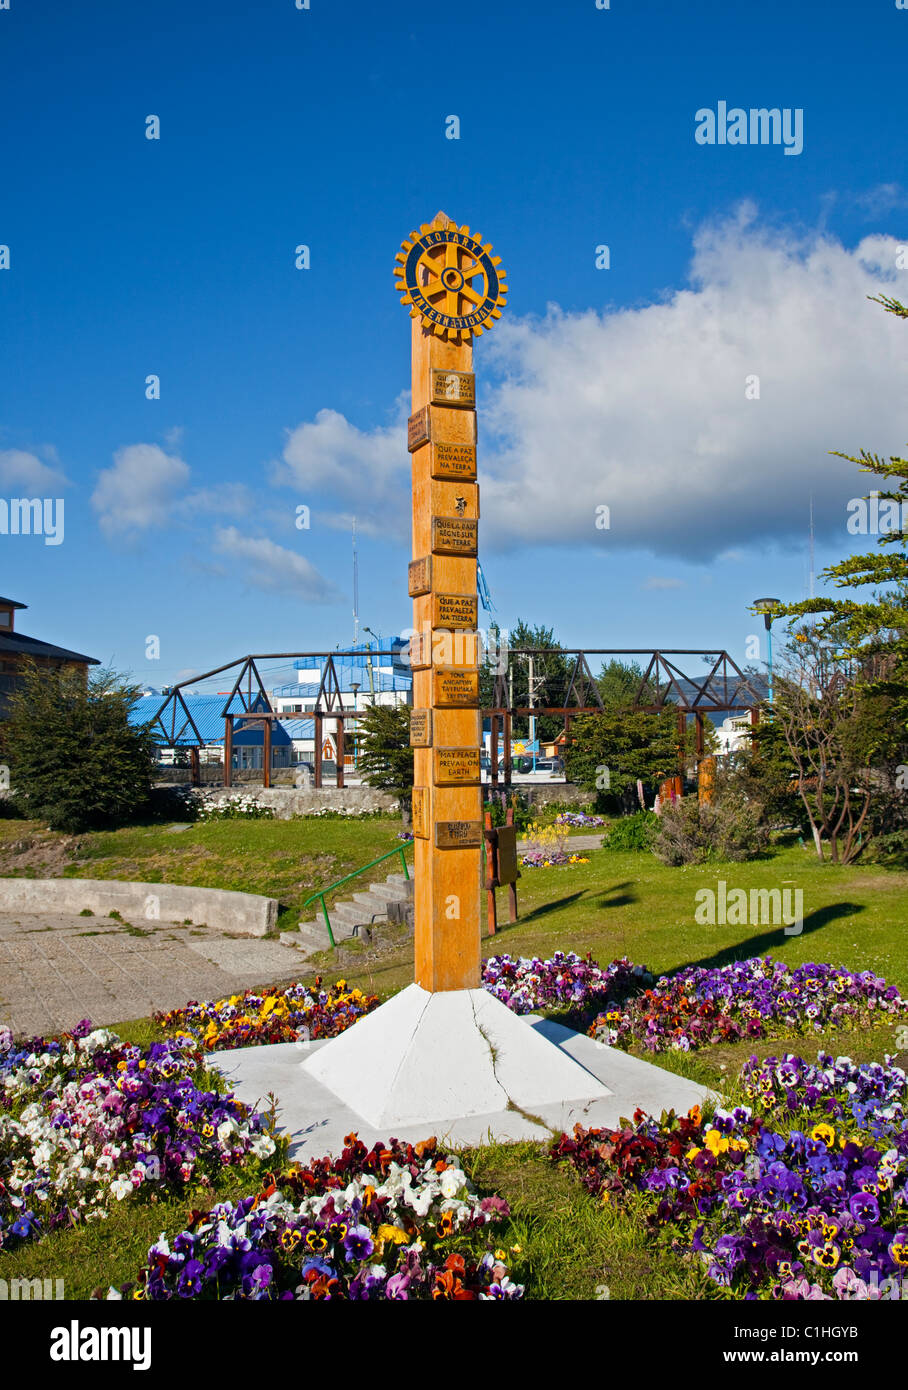 Le Rotary International Monument, Ushuaia, Tierra del Fuego, Argentina Banque D'Images